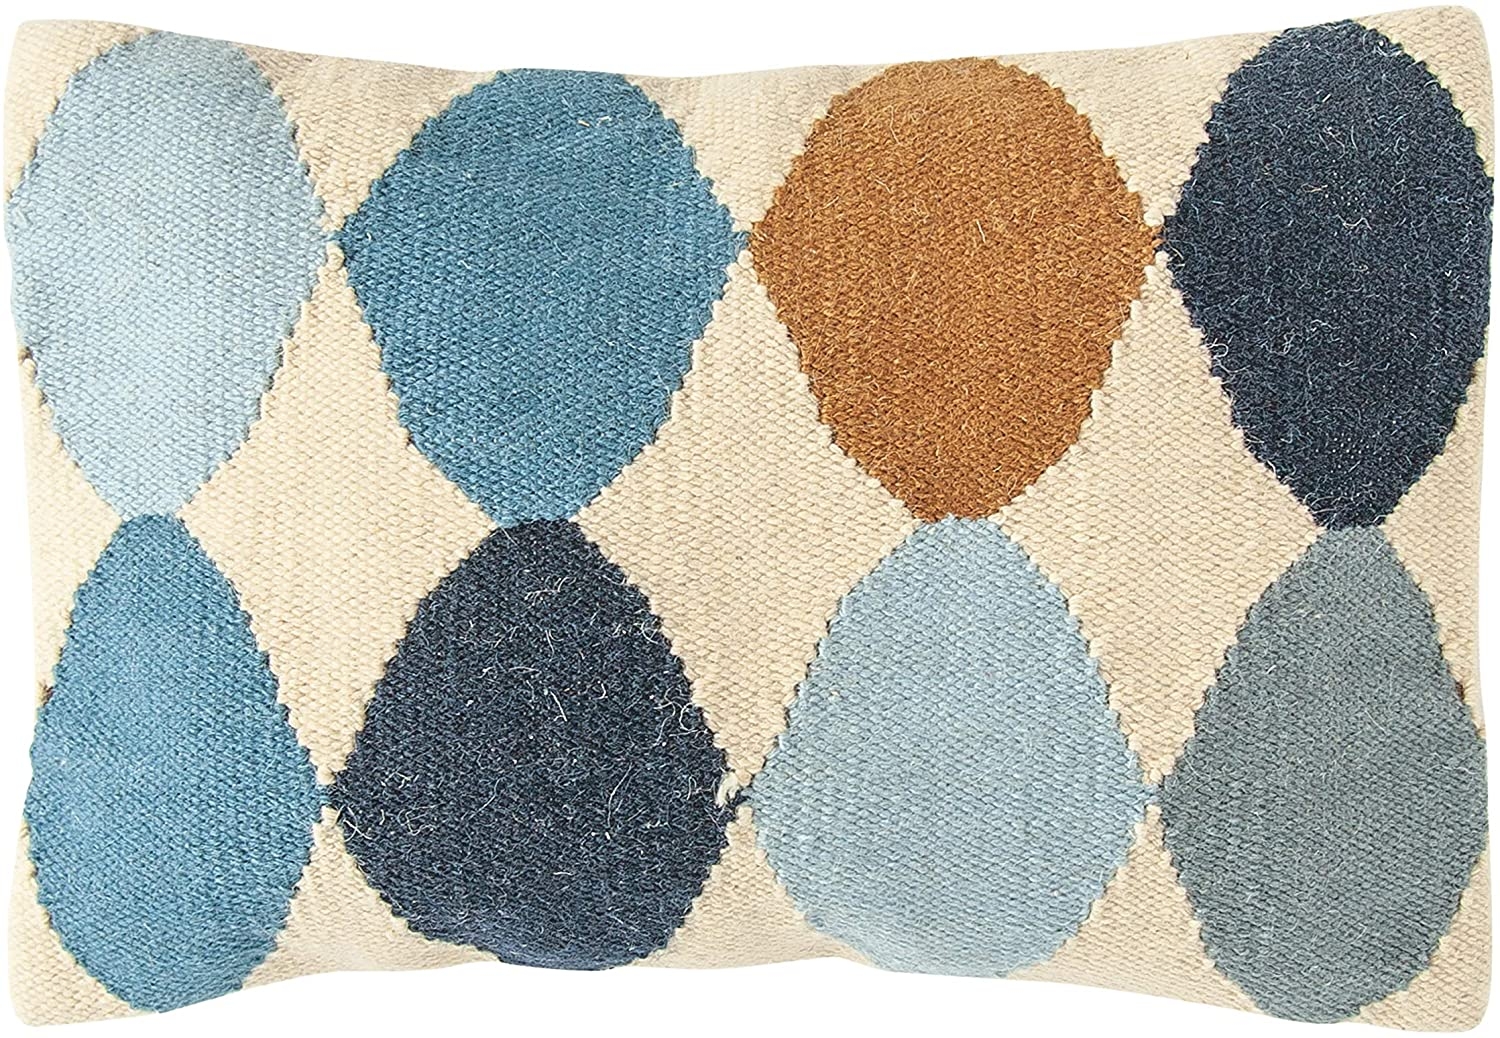 Wool Blend Lumbar Pillow with Pattern, Off-White, Blue & Brown, 26" x 16" - Image 1